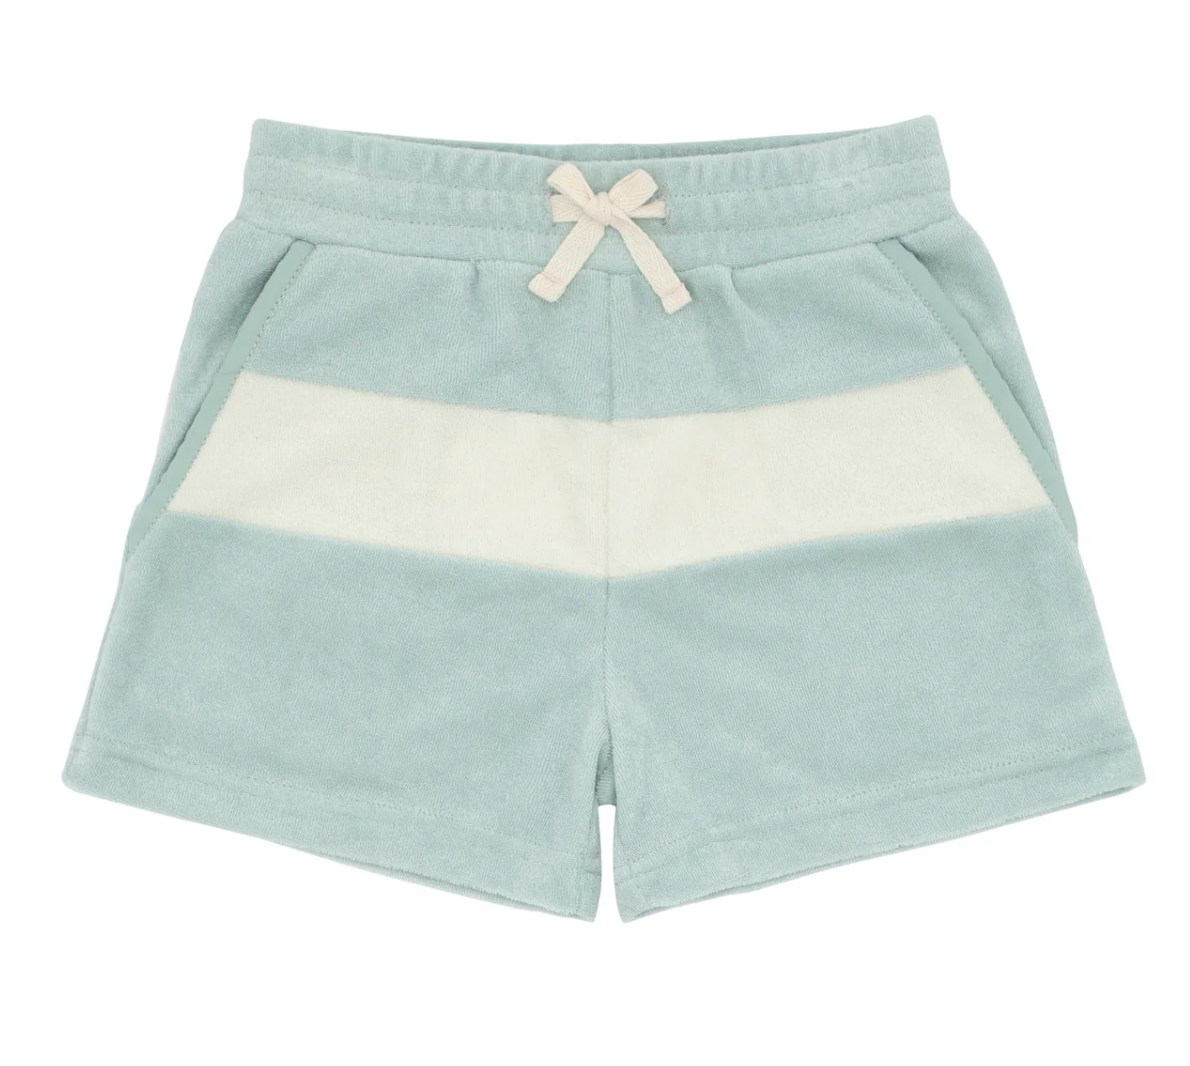 fav shorts ever!!! -> timeless scrunch shorts in the color 'sage